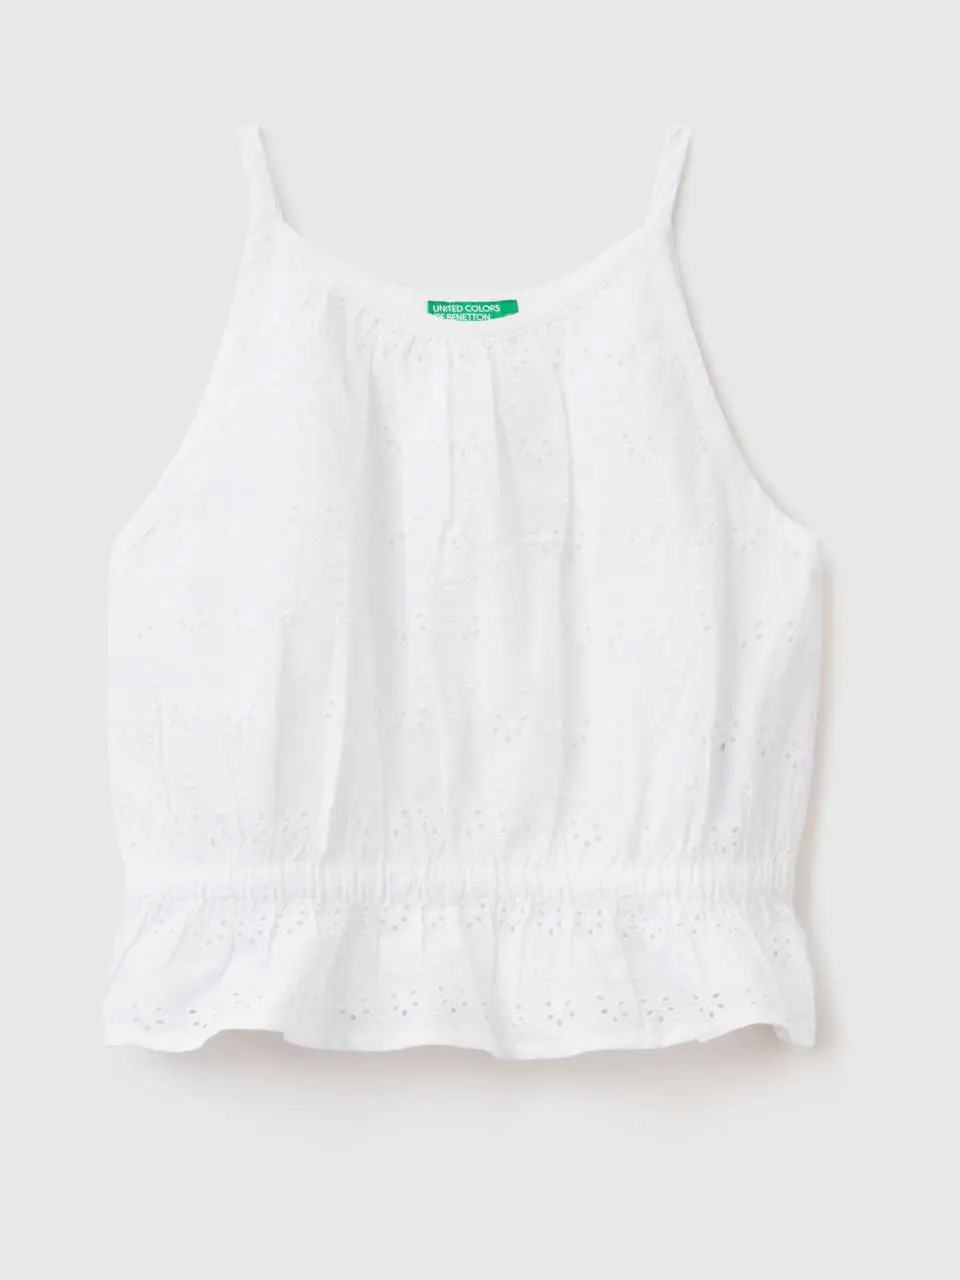 Benetton top with broderie anglaise embroidery. 1